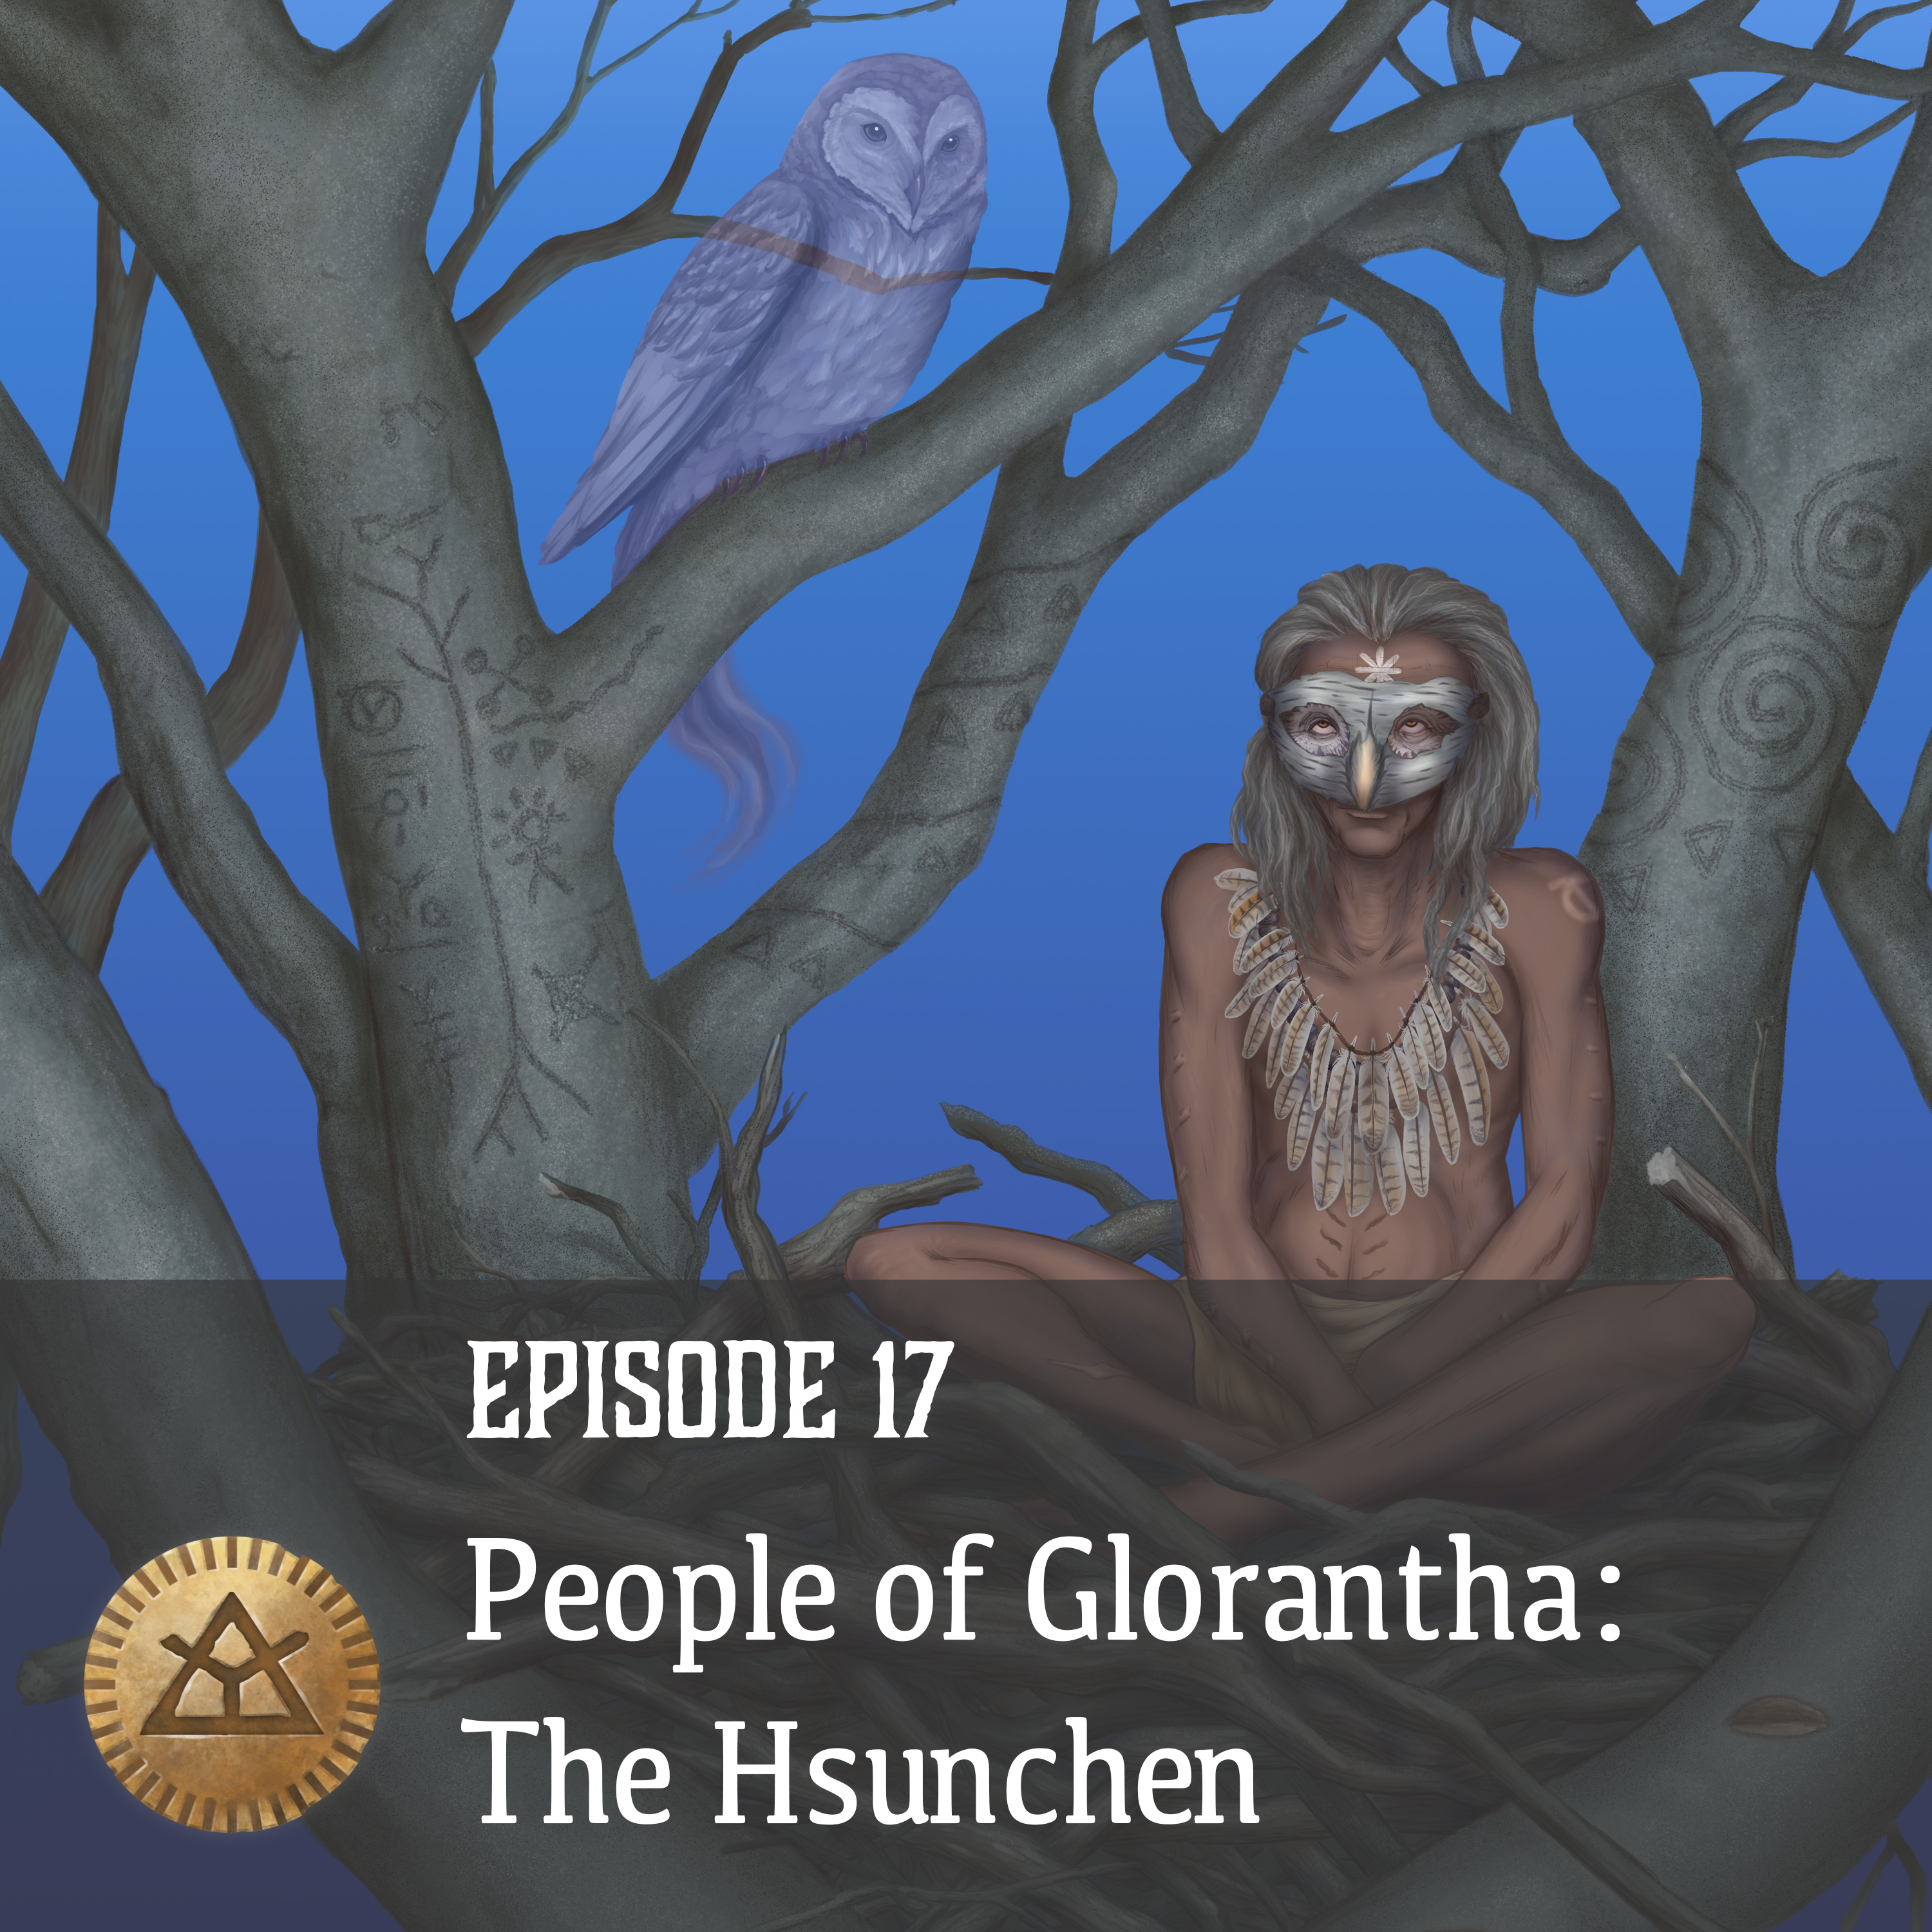 Episode 17: People of Glorantha: The Hsunchen